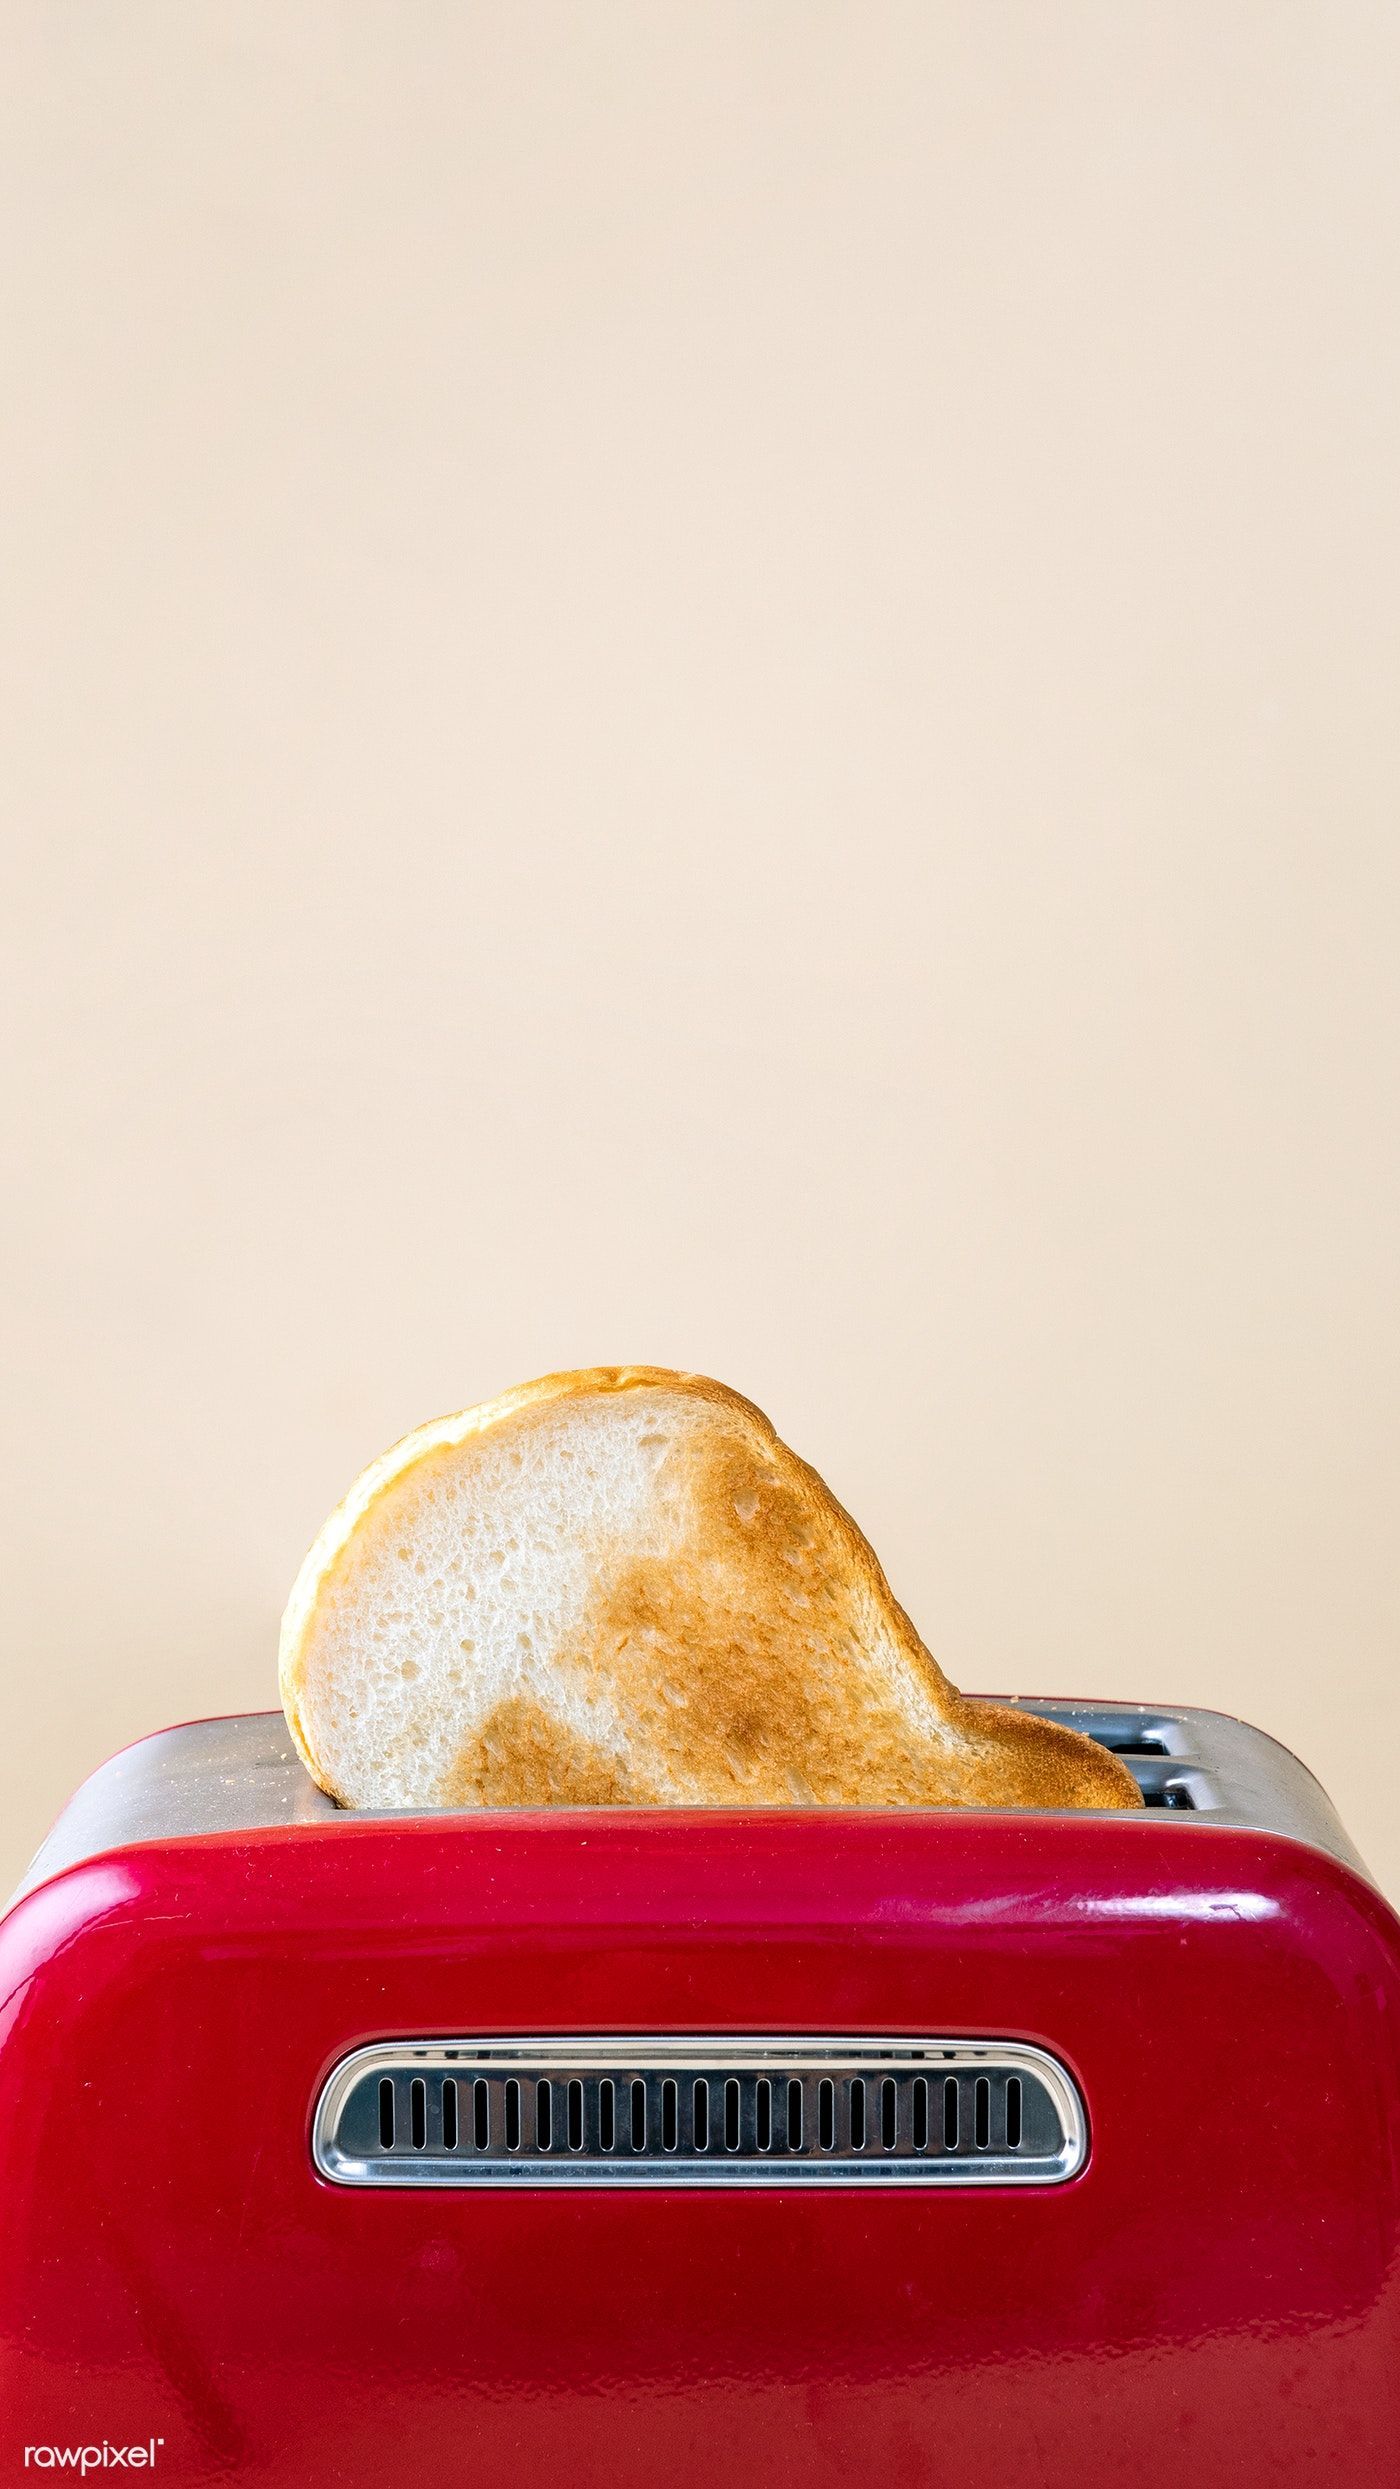 Sliced bread with red toaster mobile .com